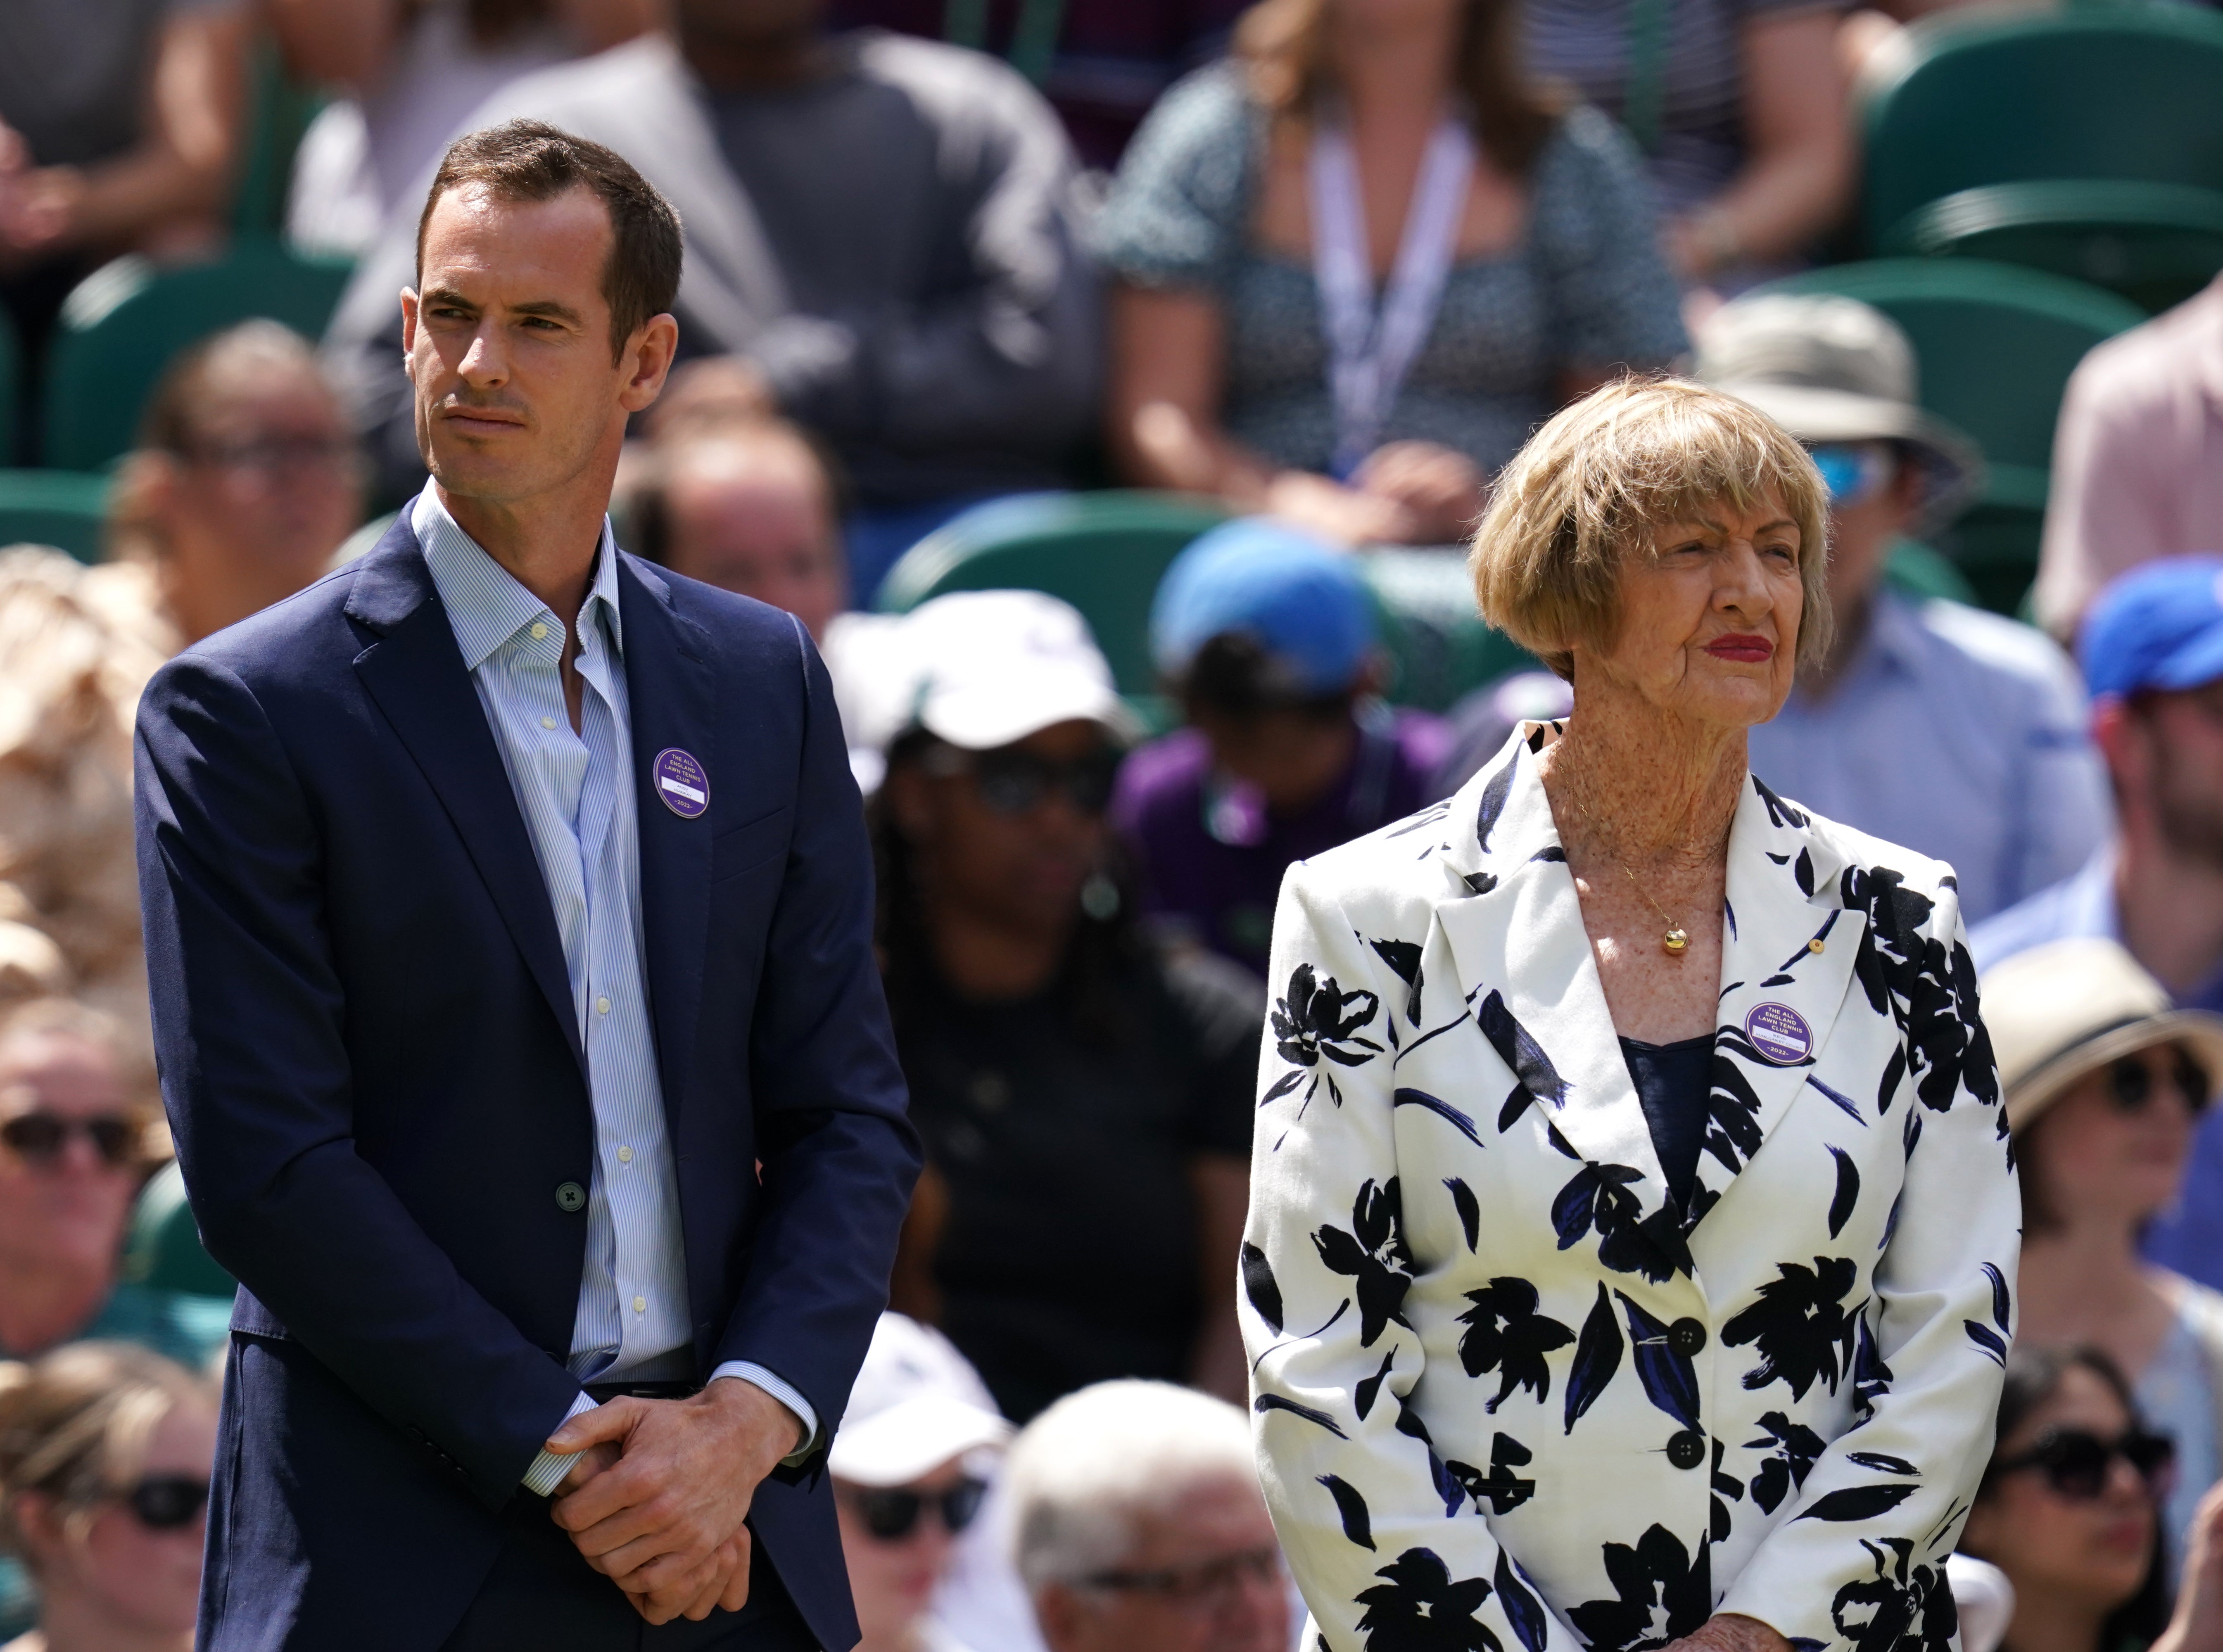 Andy Murray, left, received a loud ovation while the reception for the controversial Margaret Court, right, was not as effusive as the others (John Walton/PA)